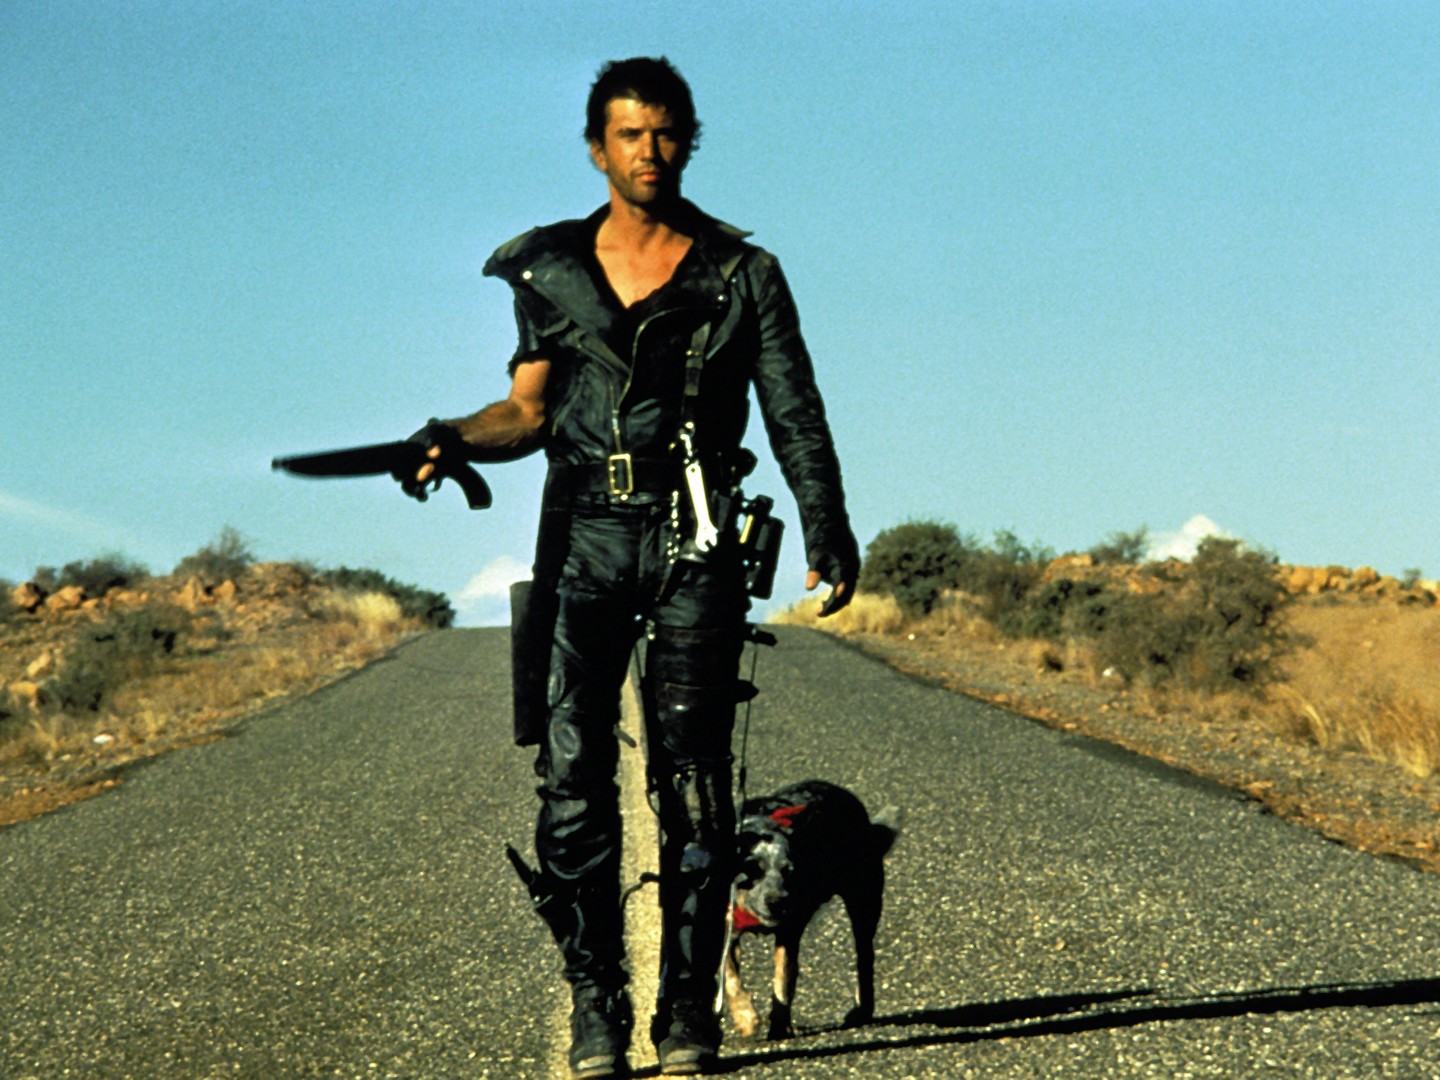 mad max 2 rotten tomatoes